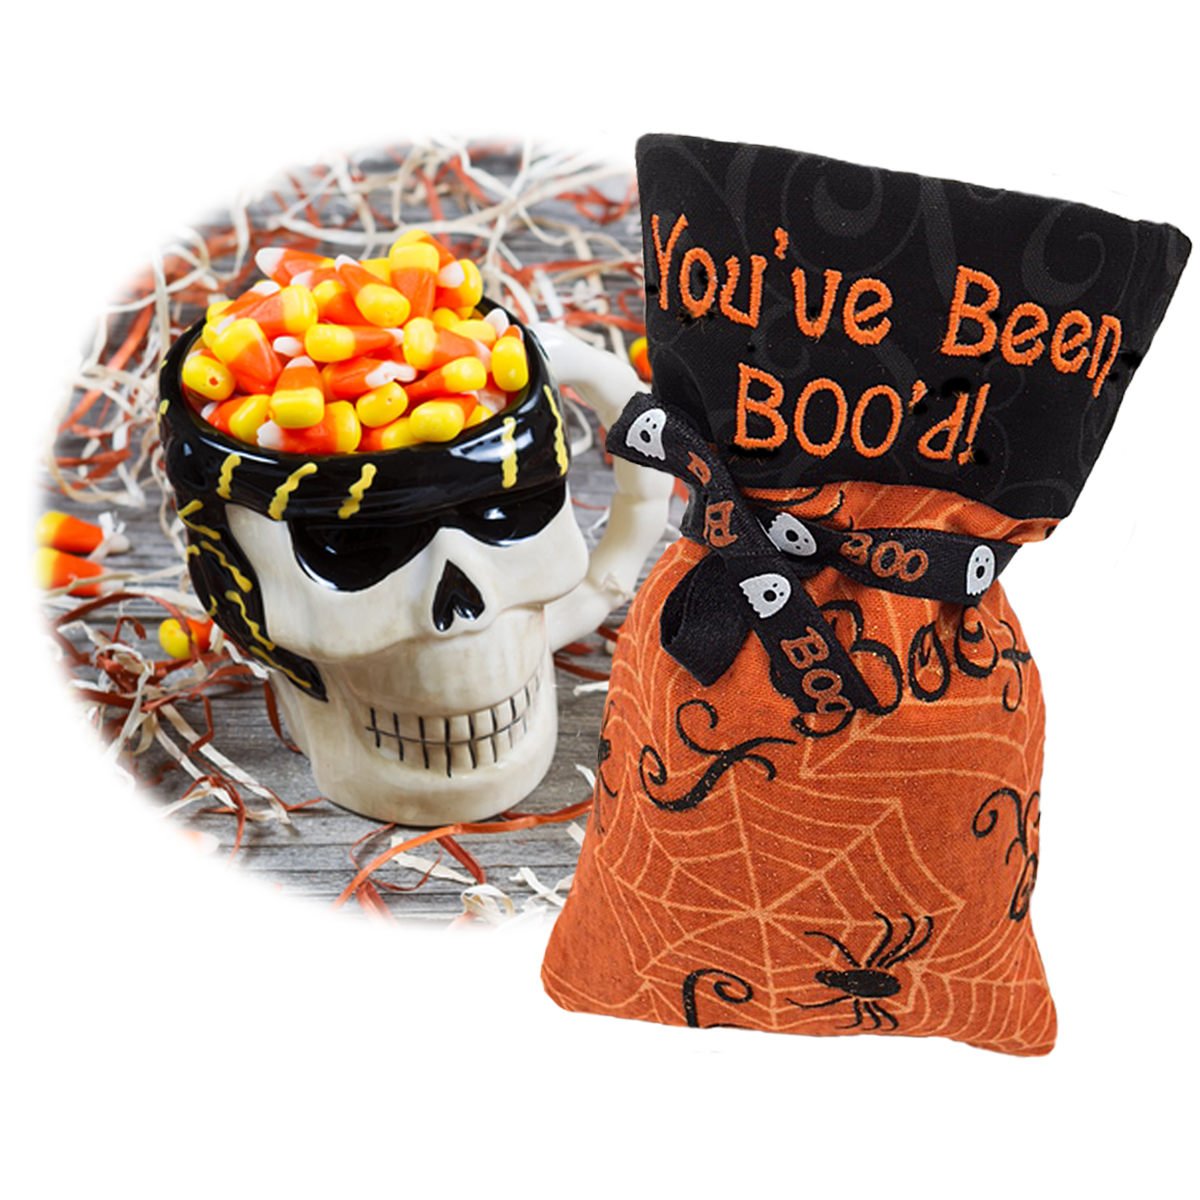 Really love this, from the Etsy shop SEWsationalStitches. etsy.me/2NXFFMZ #etsy #papergoods #halloween #treatbag #giftbag #youvebeenbood #homedecor #candybag #trickortreat #partyfavorbag